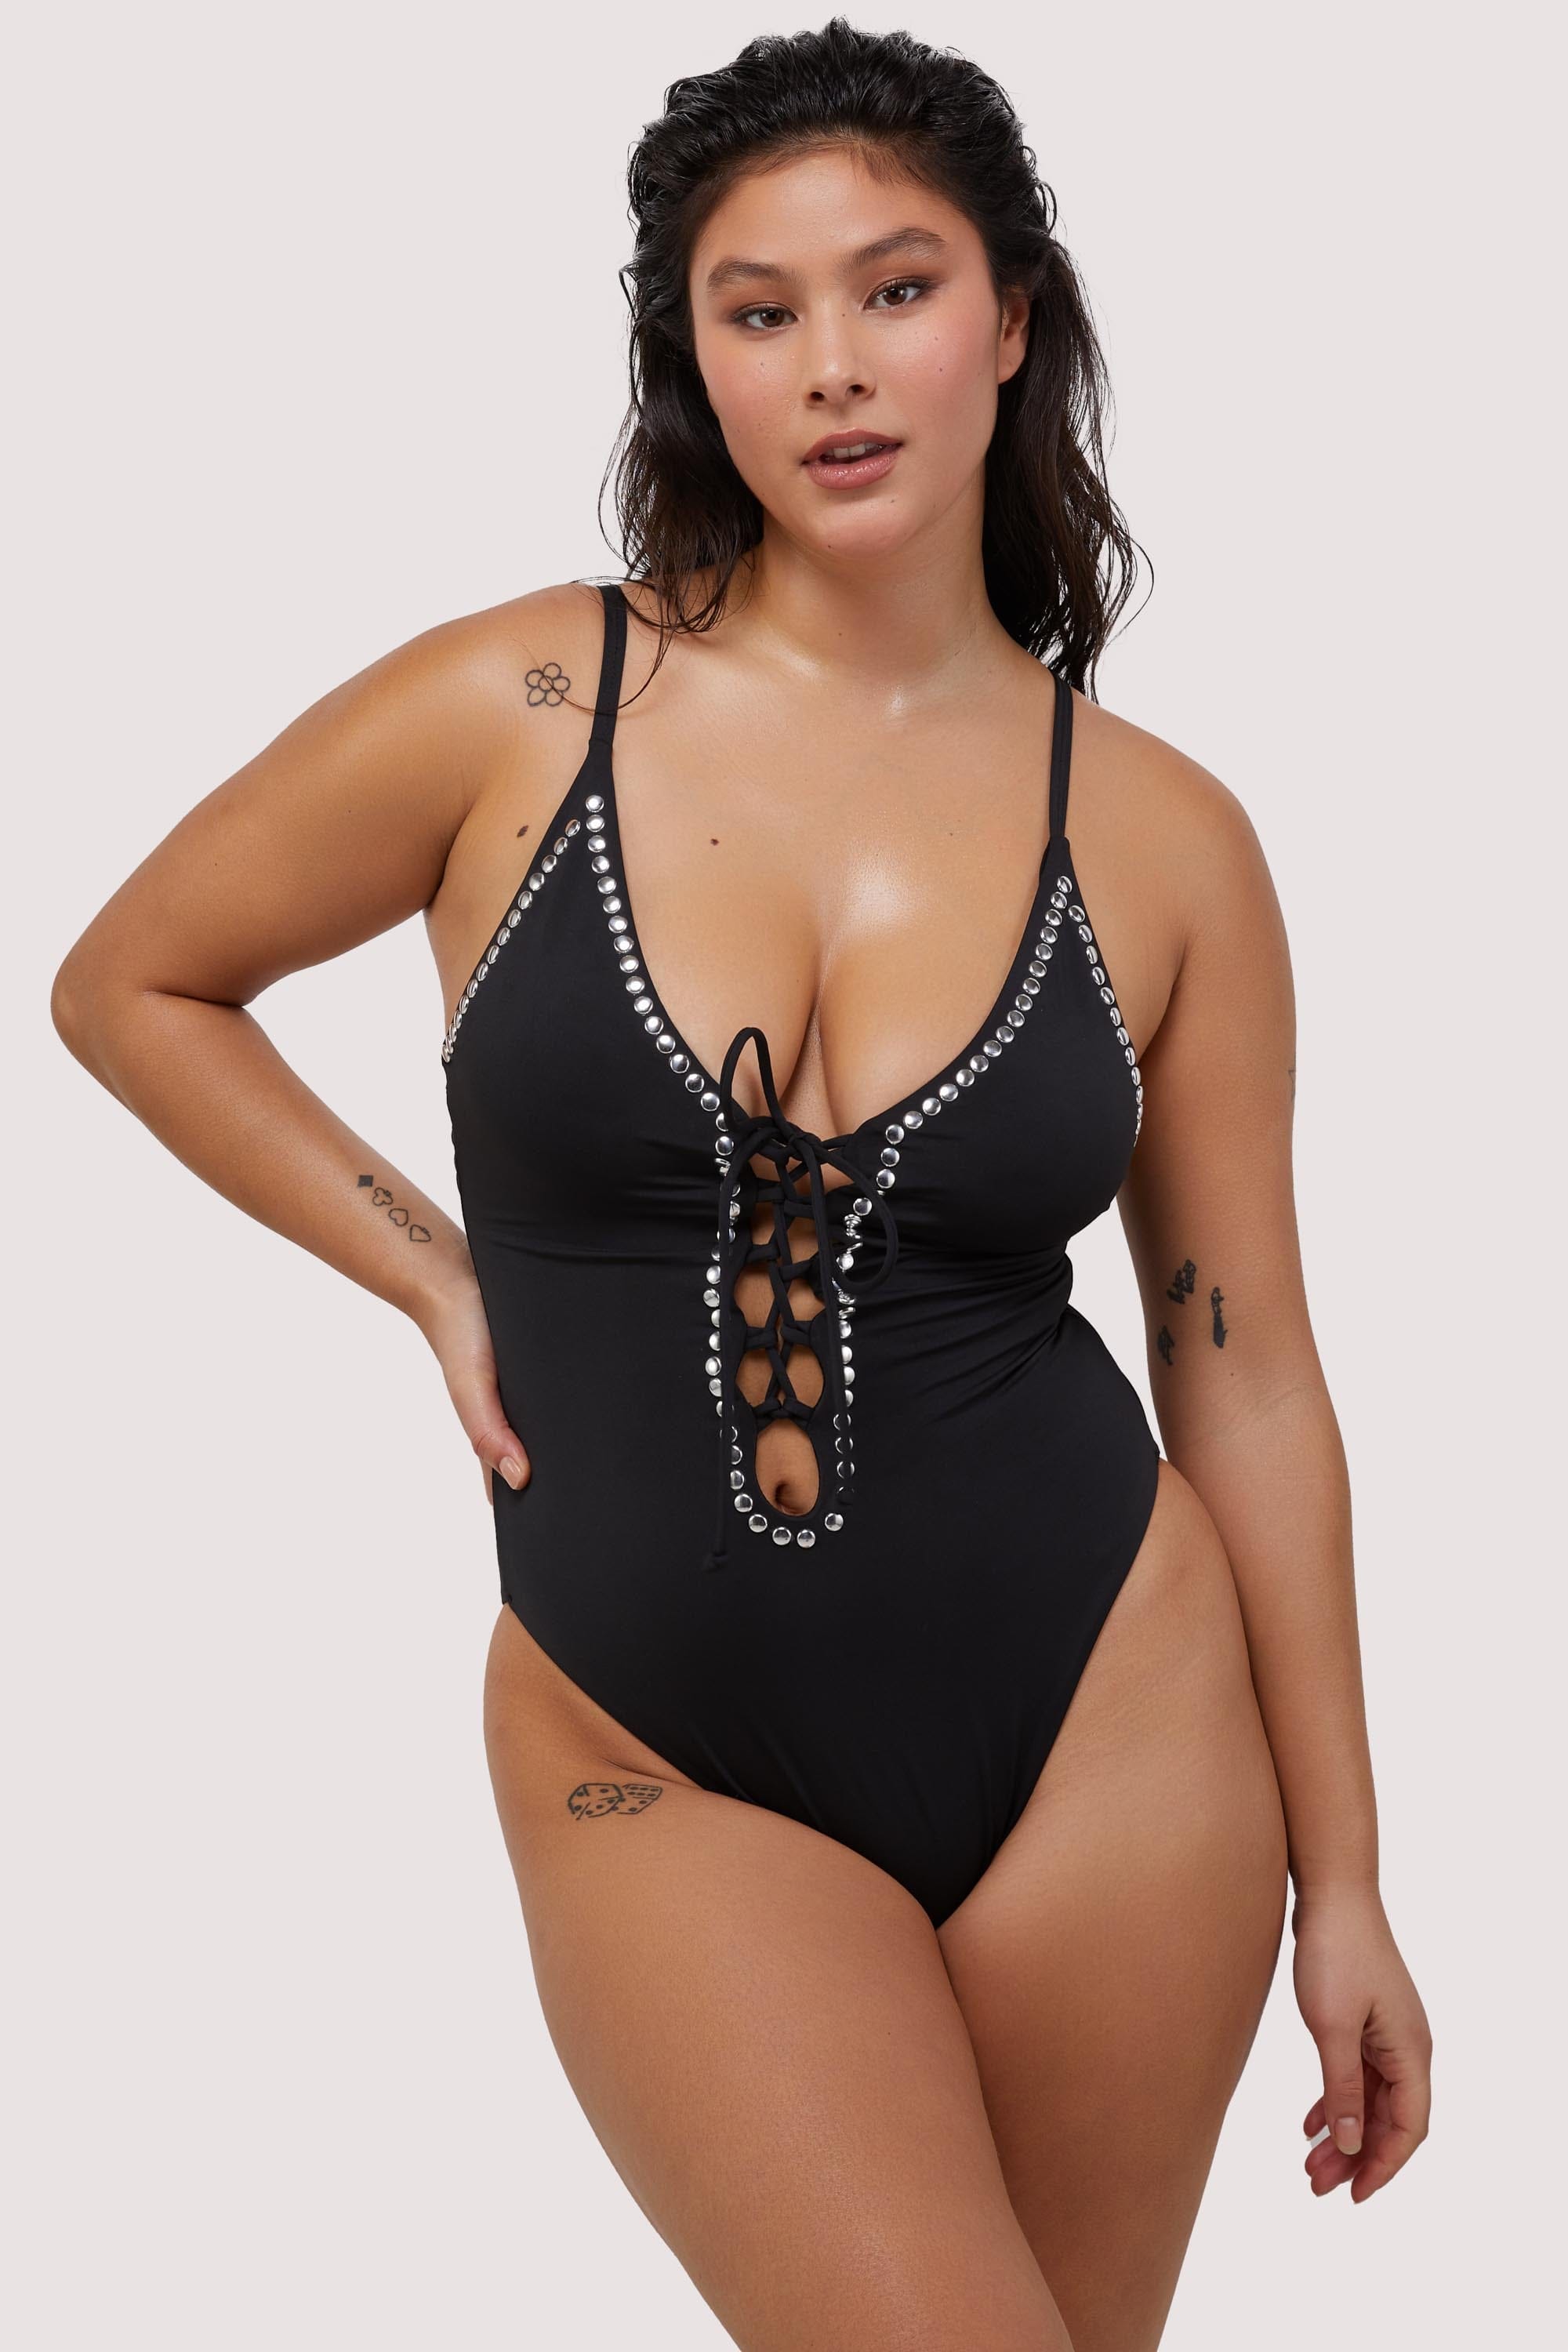 Model wears black plunge neckline lace-up swimsuit with silver studs